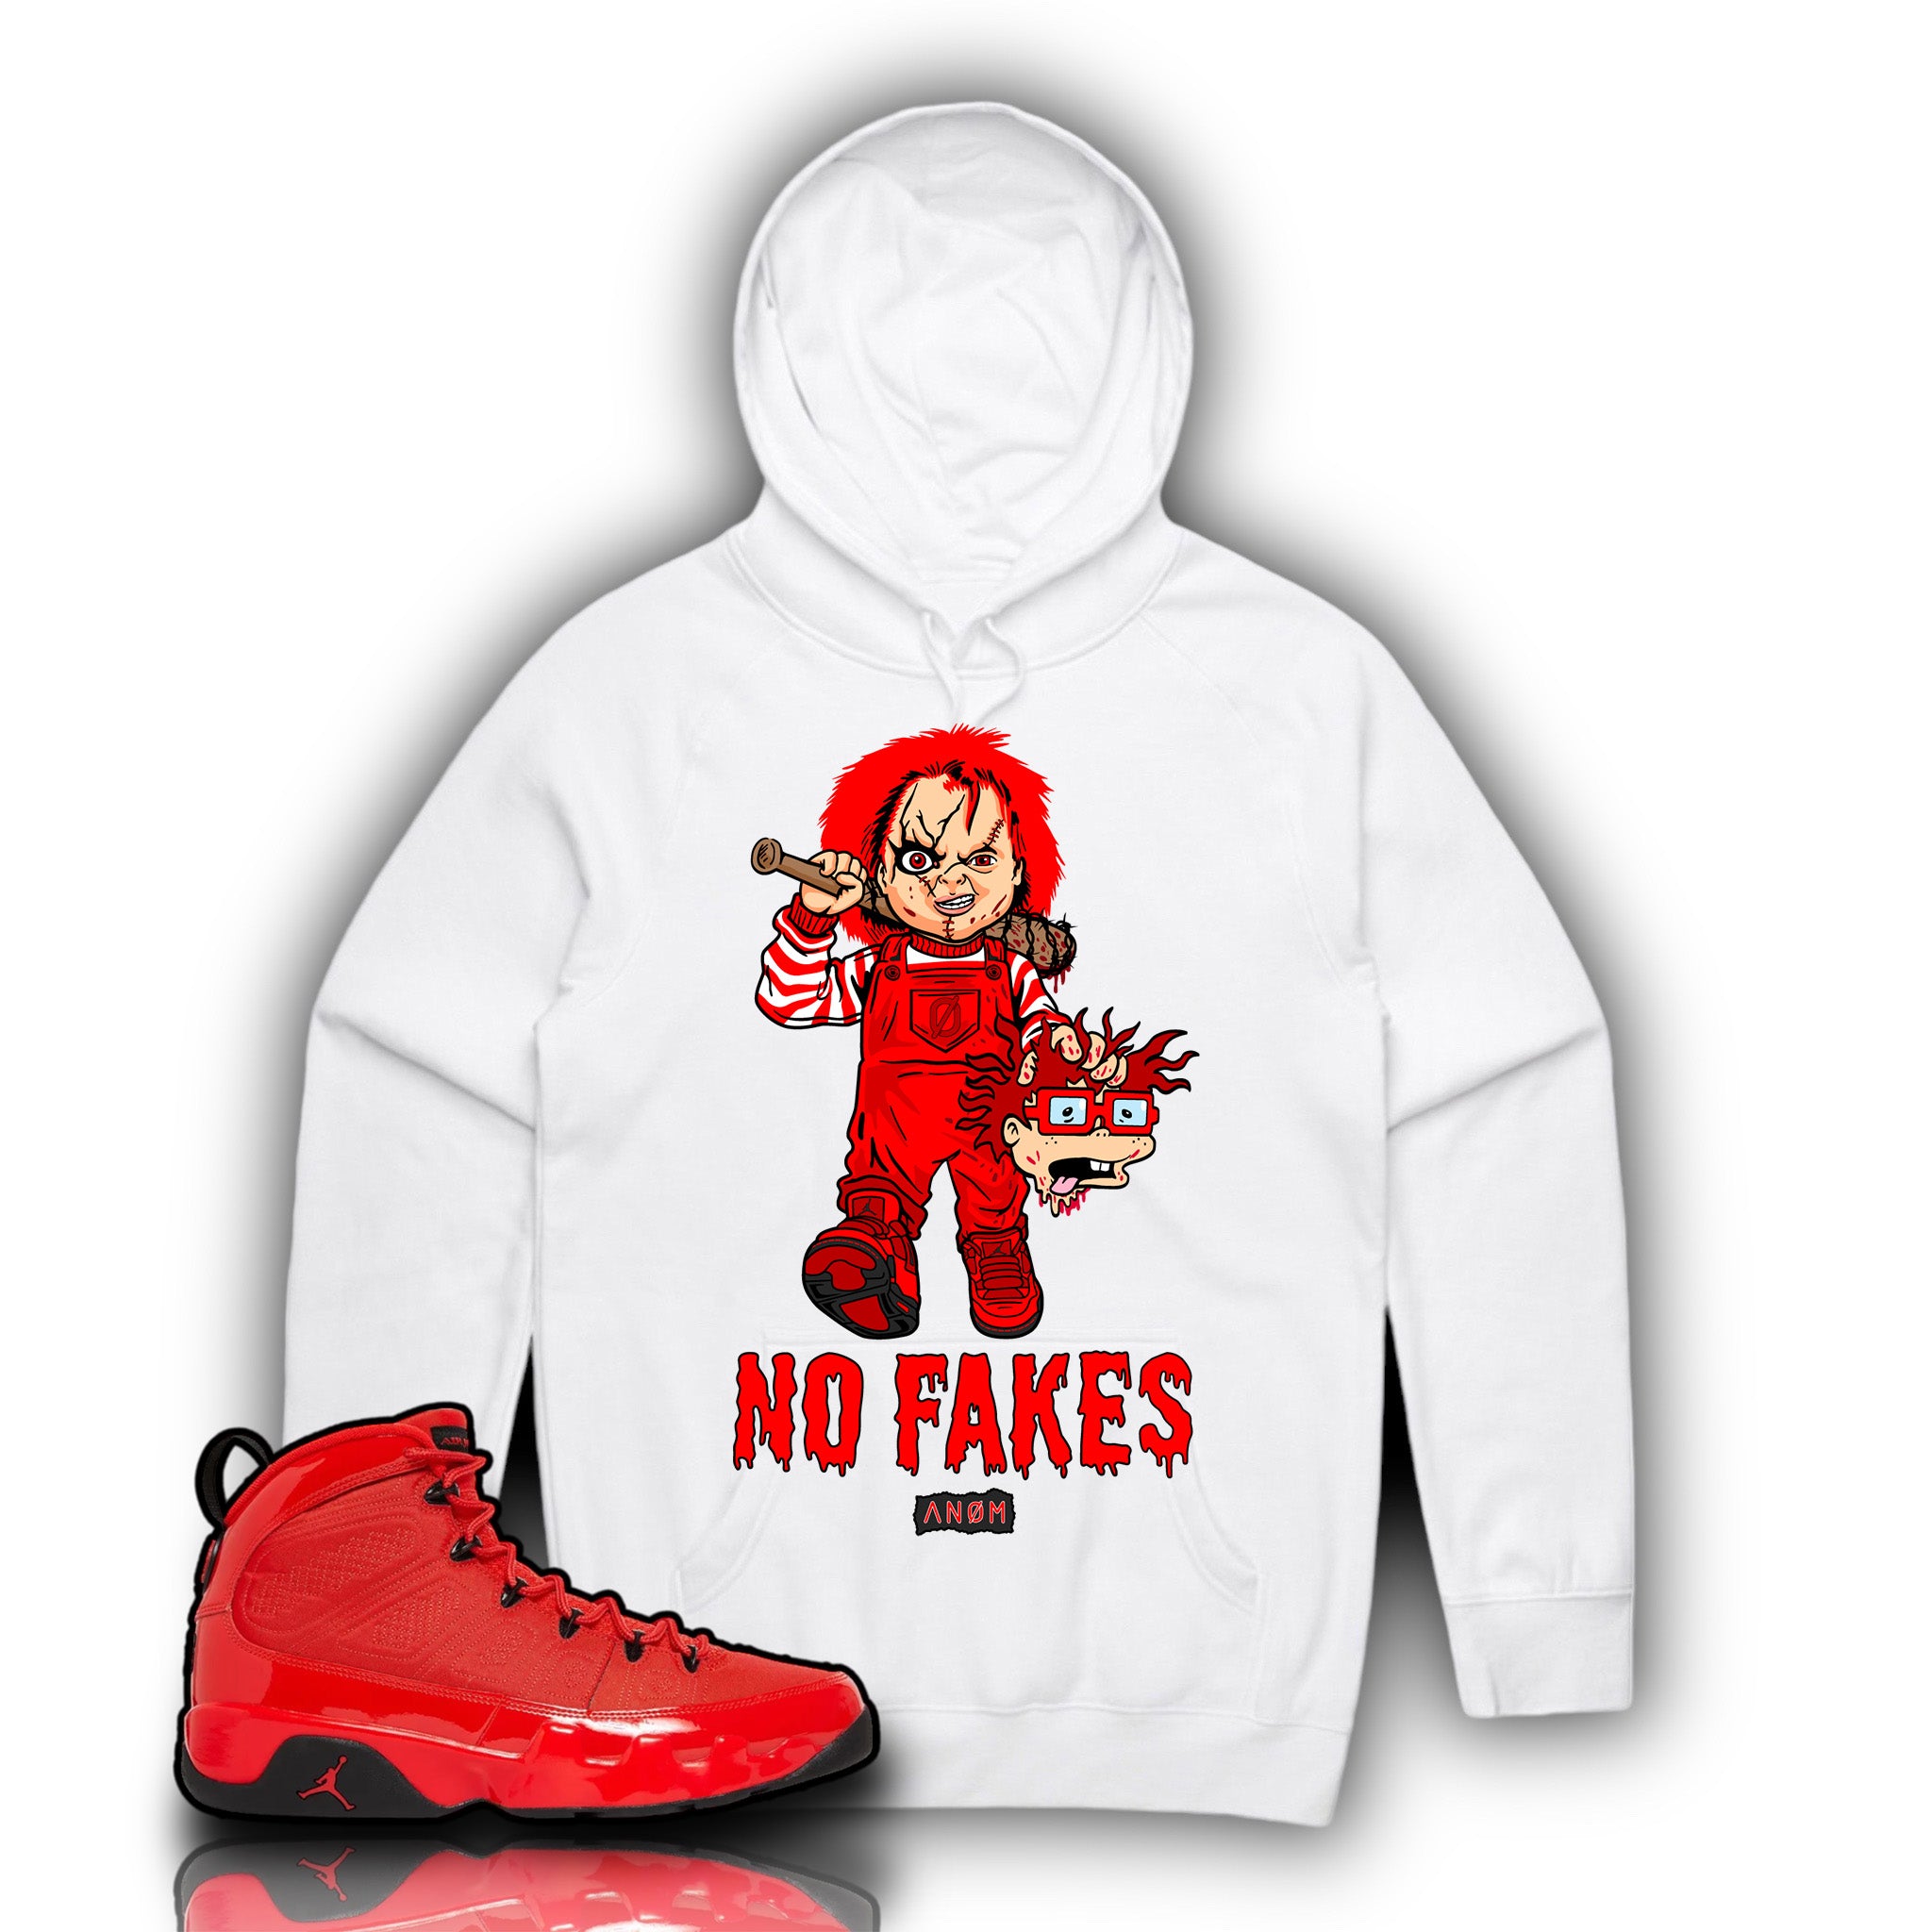 CHUCKY NO FAKES HOODIE-J9 CHILE RED TIE BACK